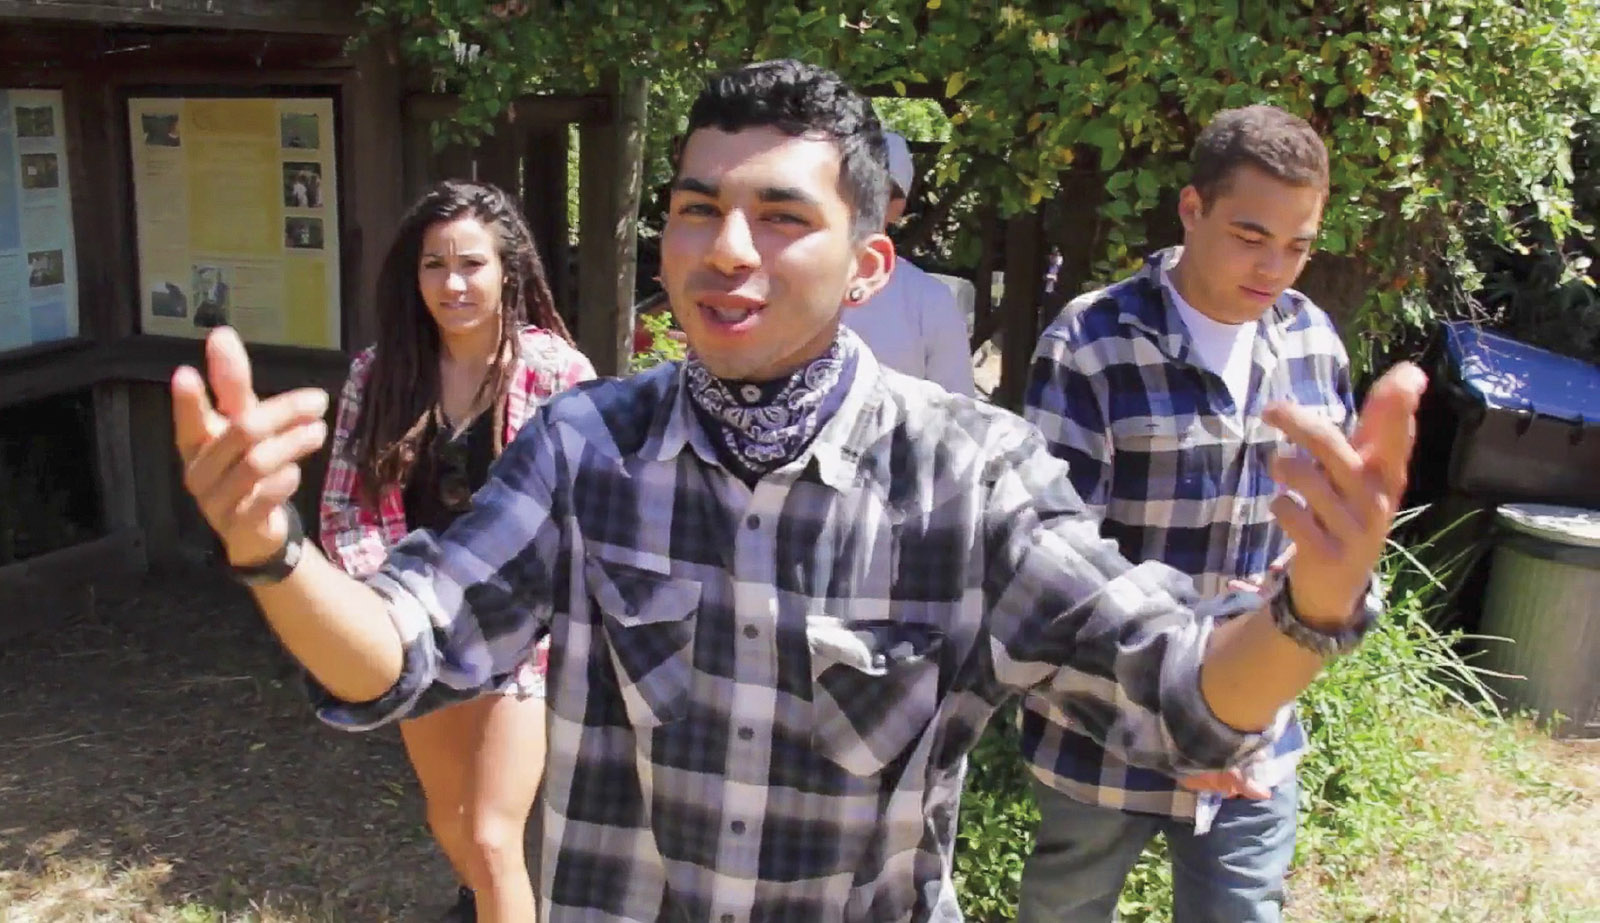 “Seeing what you're learning and learning it by doing. Tell ‘em we got dreams and goals we're pursuing. Tell ‘em we're choosing to make a change right here.”— Can UC music video, produced by UC Santa Cruz Students including David Robles (center), Aubrey Wilson (right) and Alyssa Billys (left)